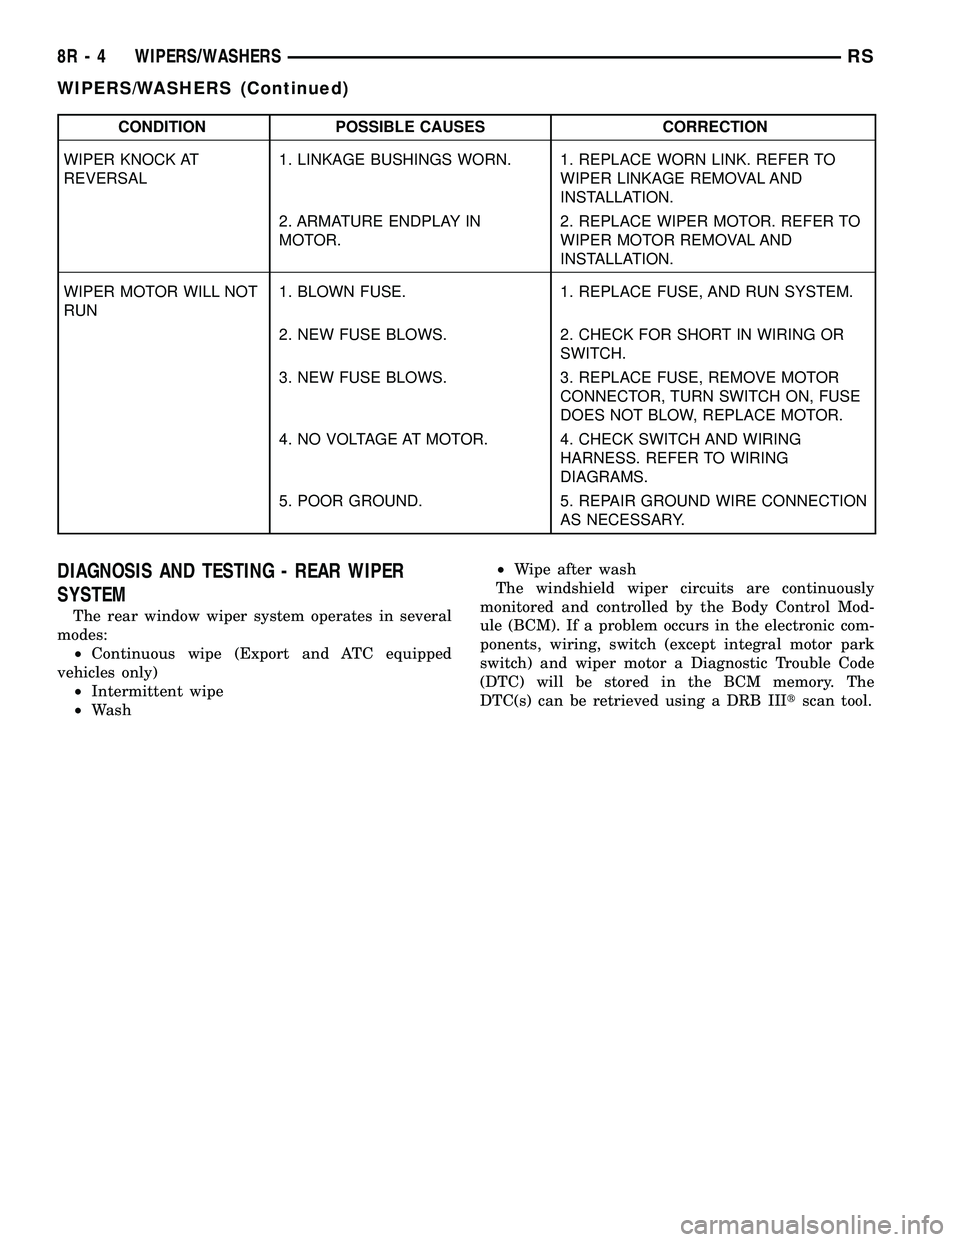 CHRYSLER VOYAGER 2005  Service Manual CONDITION POSSIBLE CAUSES CORRECTION
WIPER KNOCK AT
REVERSAL1. LINKAGE BUSHINGS WORN. 1. REPLACE WORN LINK. REFER TO
WIPER LINKAGE REMOVAL AND
INSTALLATION.
2. ARMATURE ENDPLAY IN
MOTOR.2. REPLACE WIP